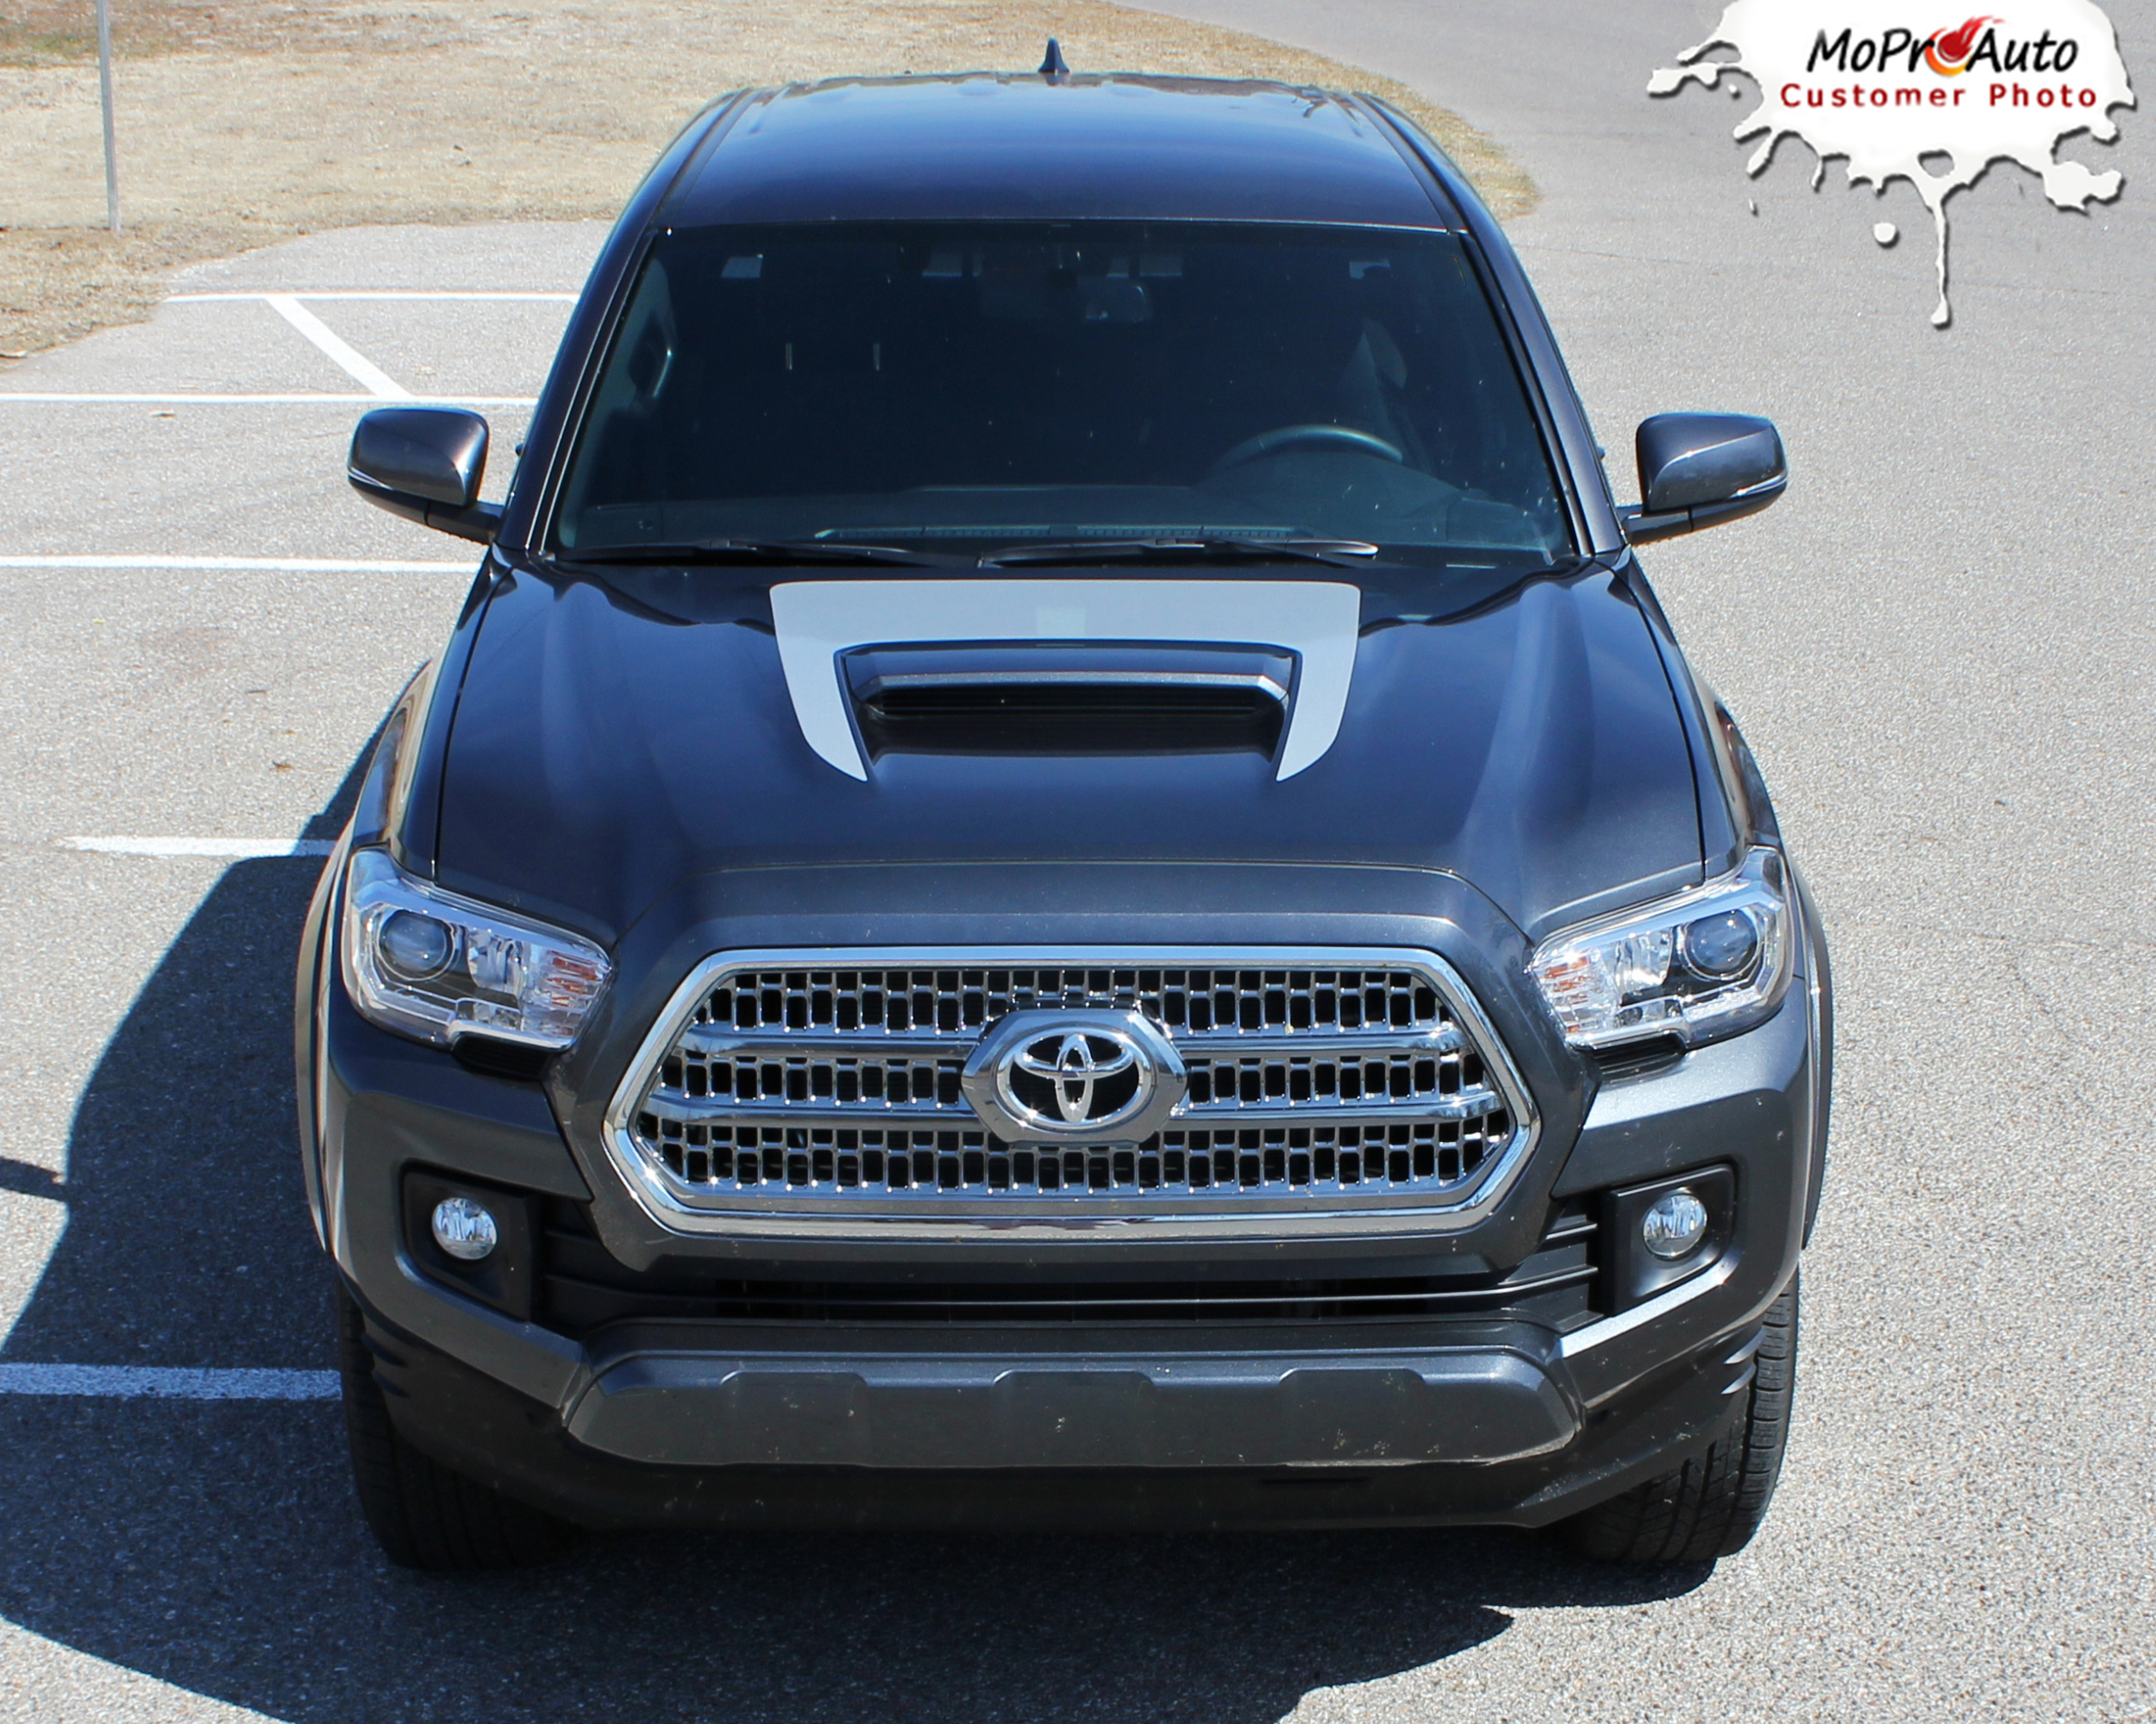 SPORT HOOD - Toyota Tacoma Truck TRD Sport Pro 3M 1080 Vinyl Graphics, Stripes and Decals Package by MoProAuto Pro Design Series